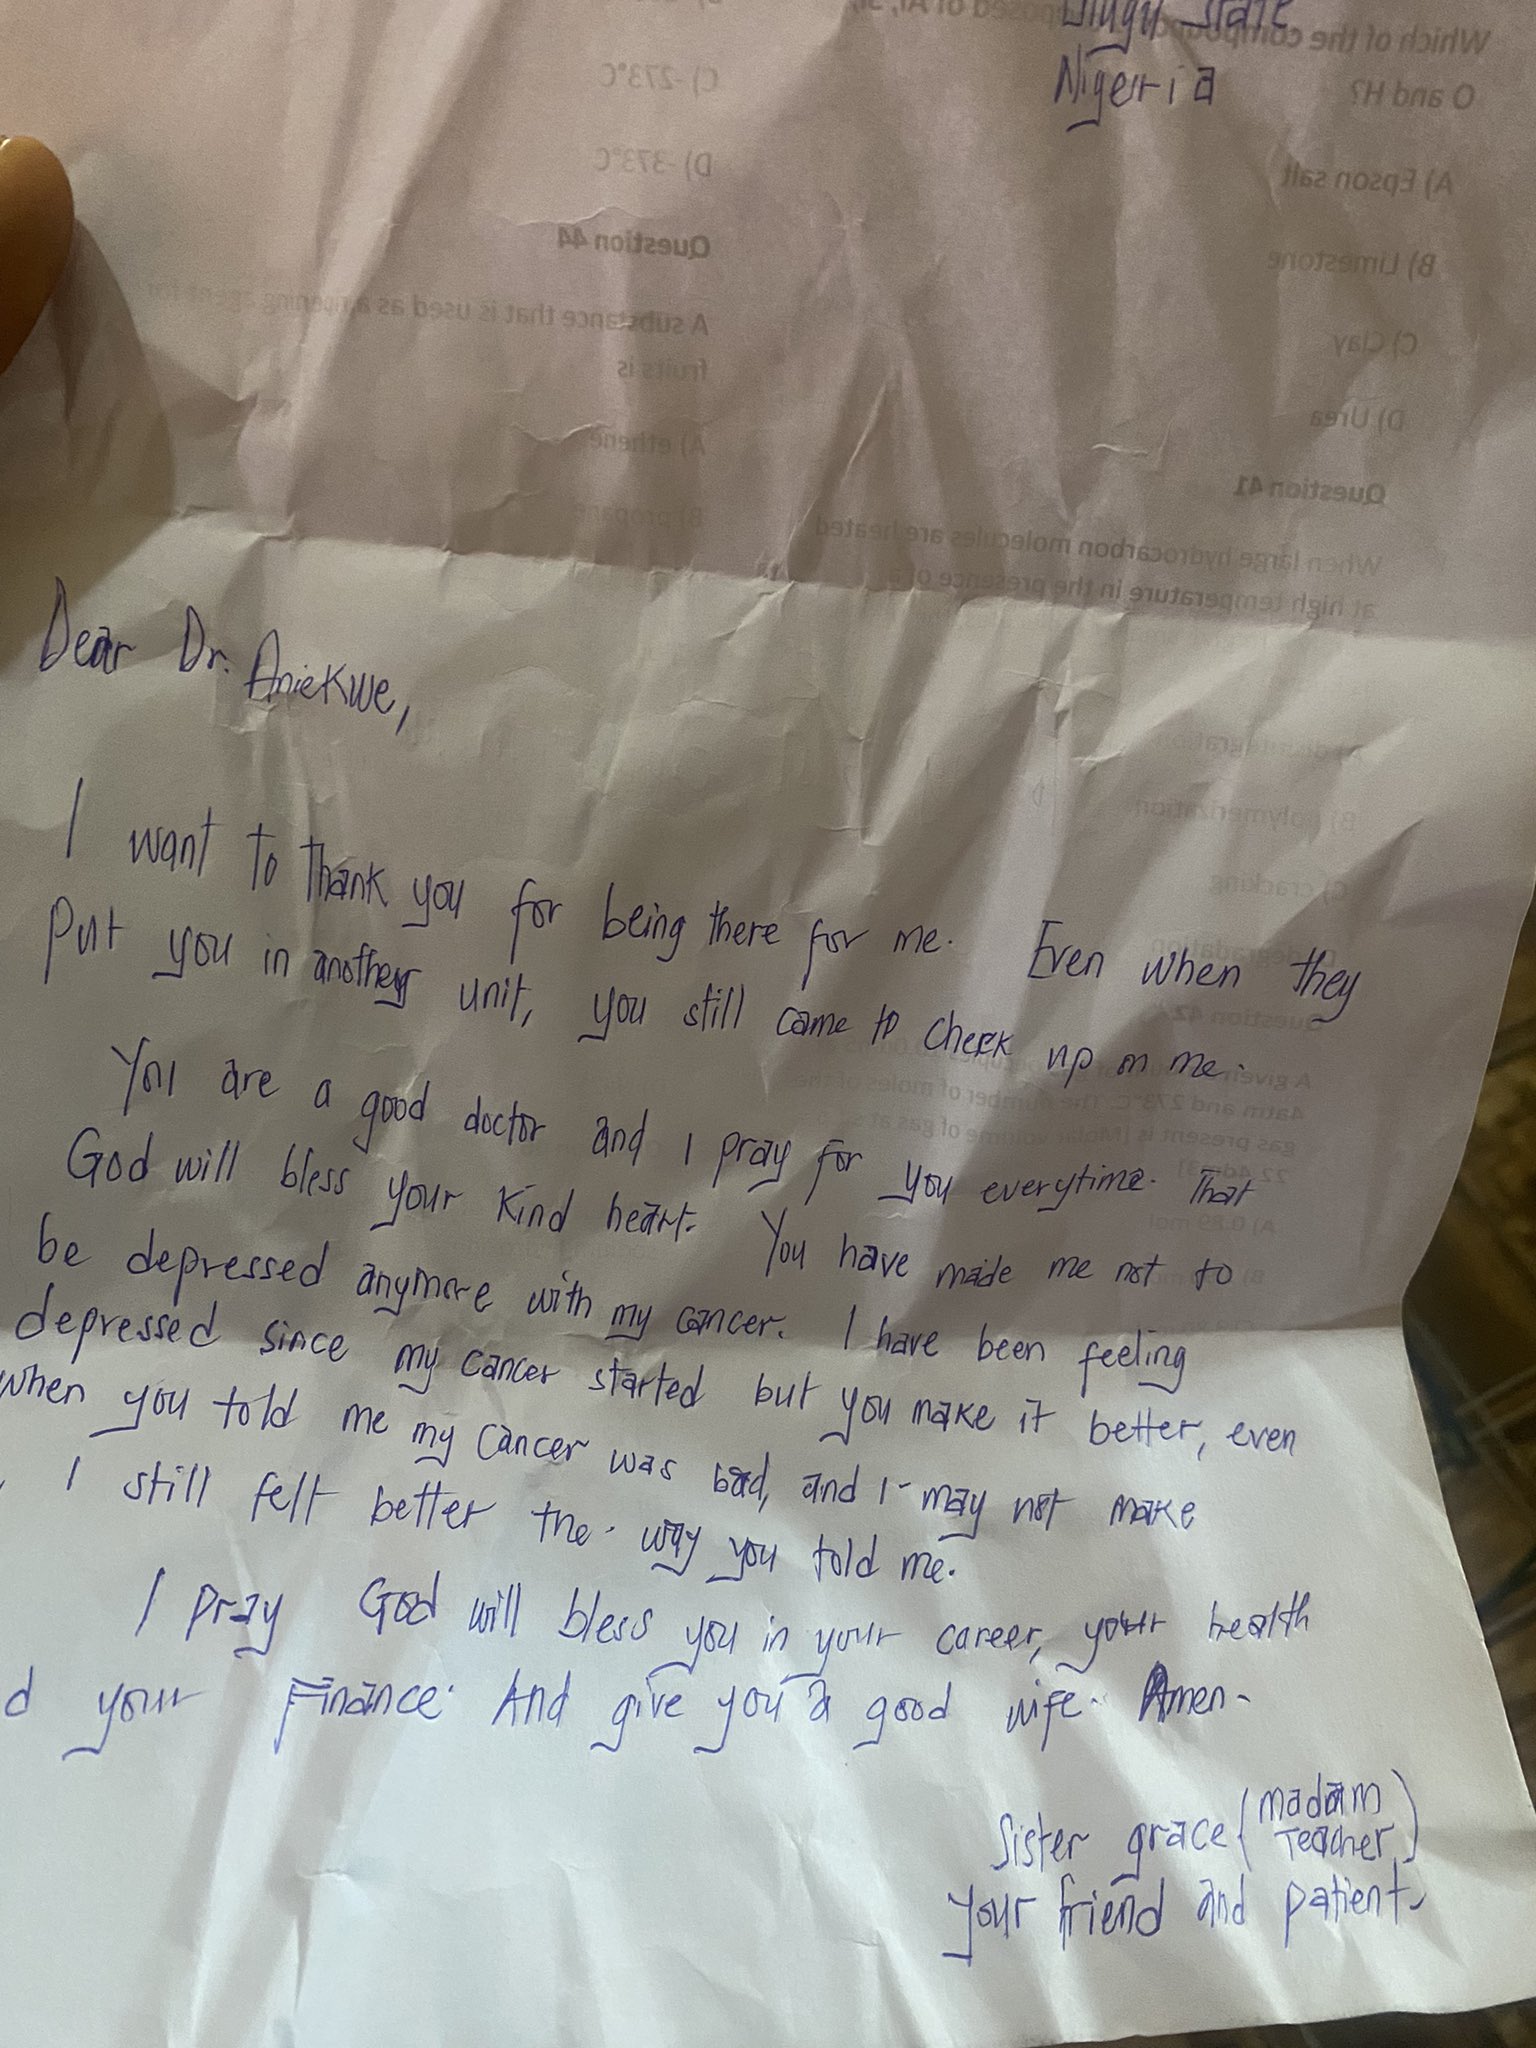 Nigerian doctor shares heartwarming letter his patient left behind for him before she passed away